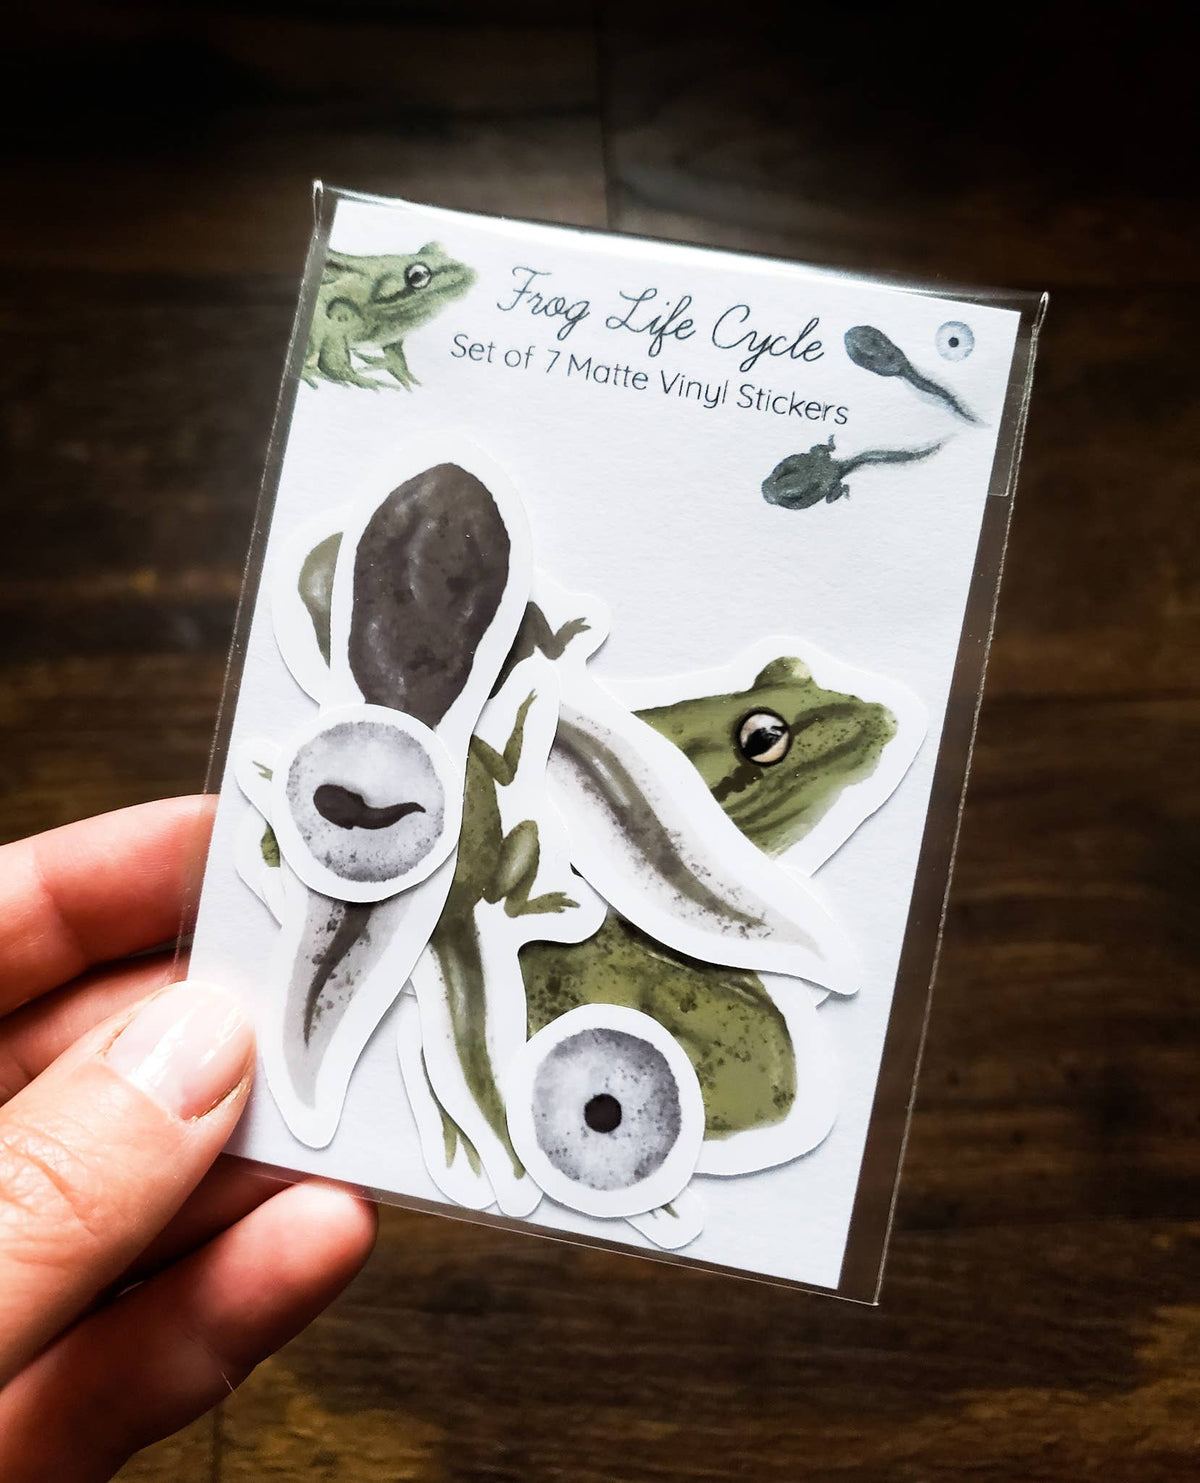 Stephanie Hathaway Designs - Frog Life Cycle Sticker Pack, Set of 7 Matte Vinyl Stickers